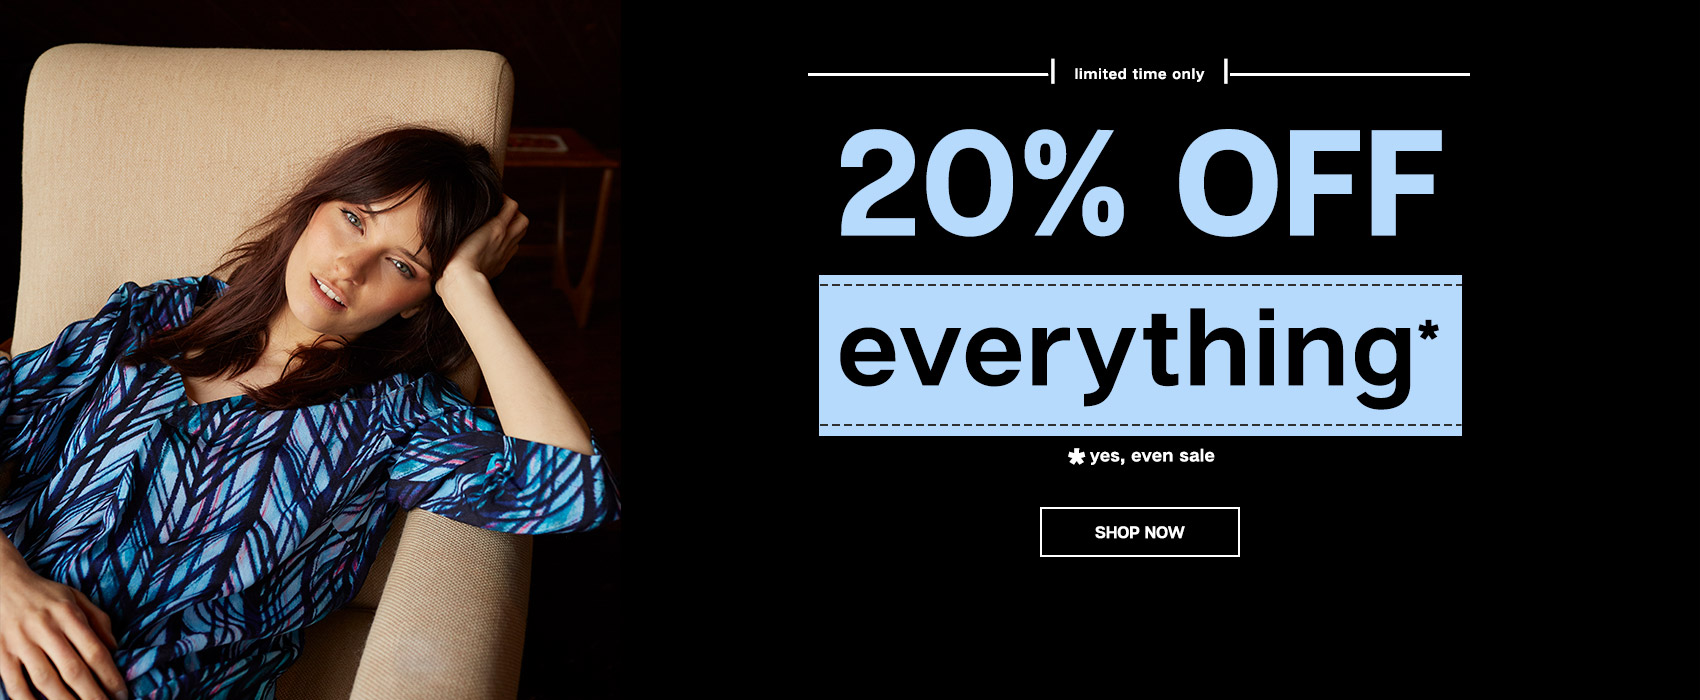 Dashfashion: 20% off clothing and accessories